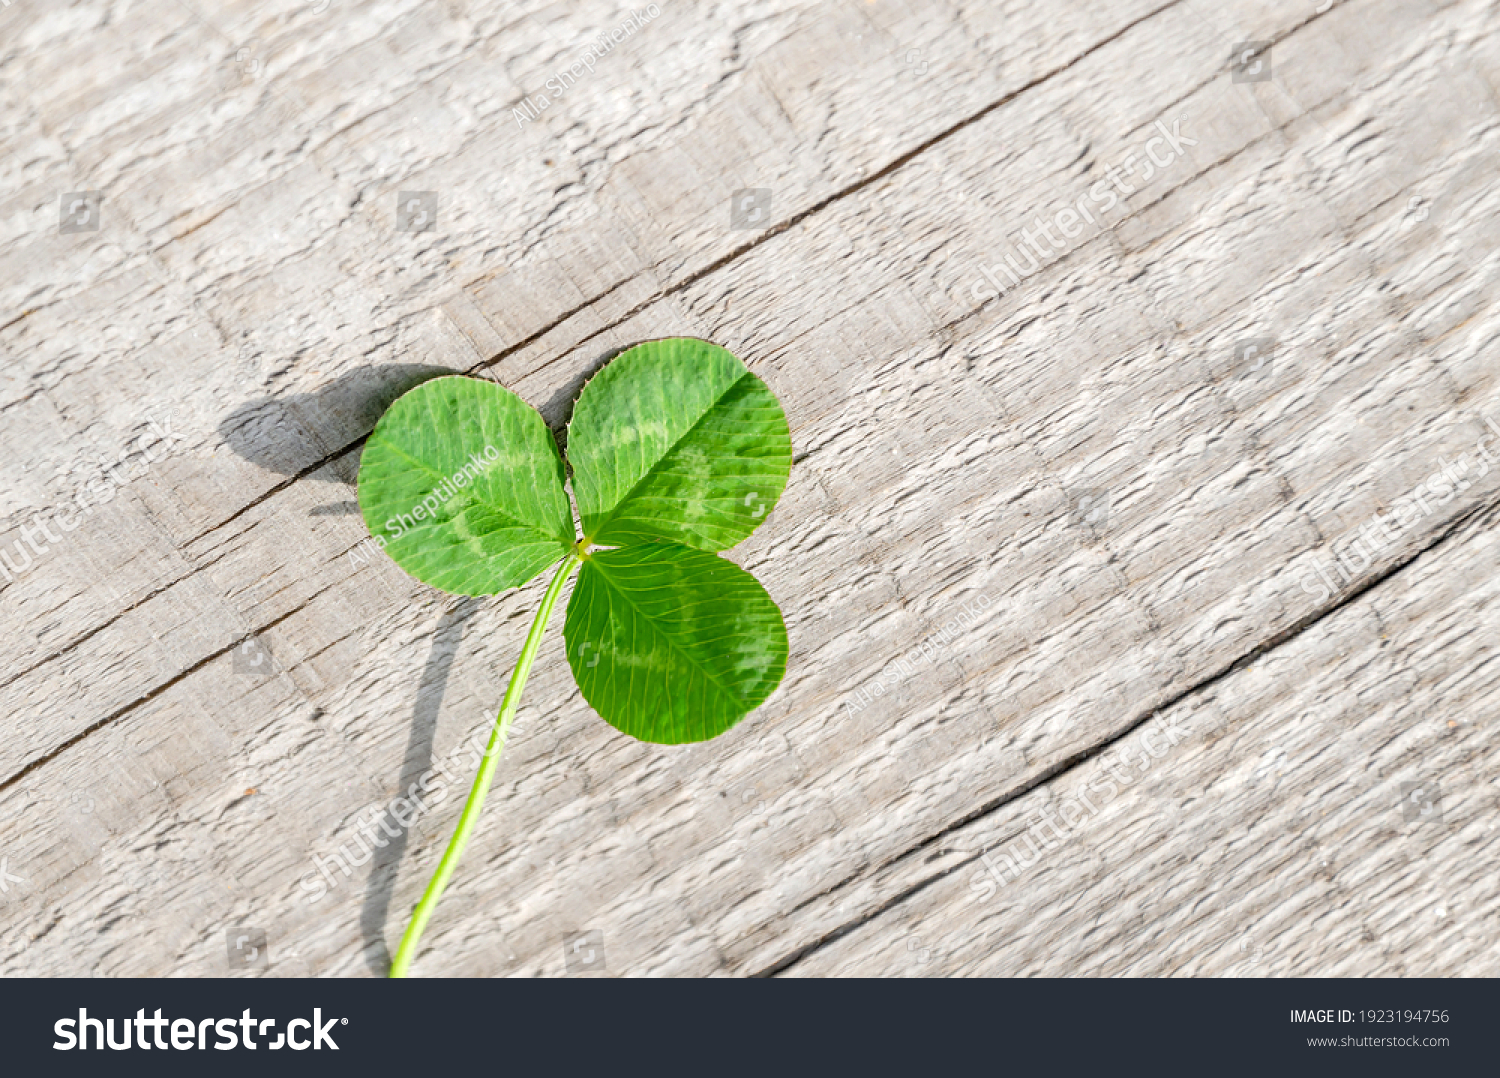 Green leaf of clover on a background of old wooden boards. Shamrock symbol of St. Patrick's Day. #1923194756